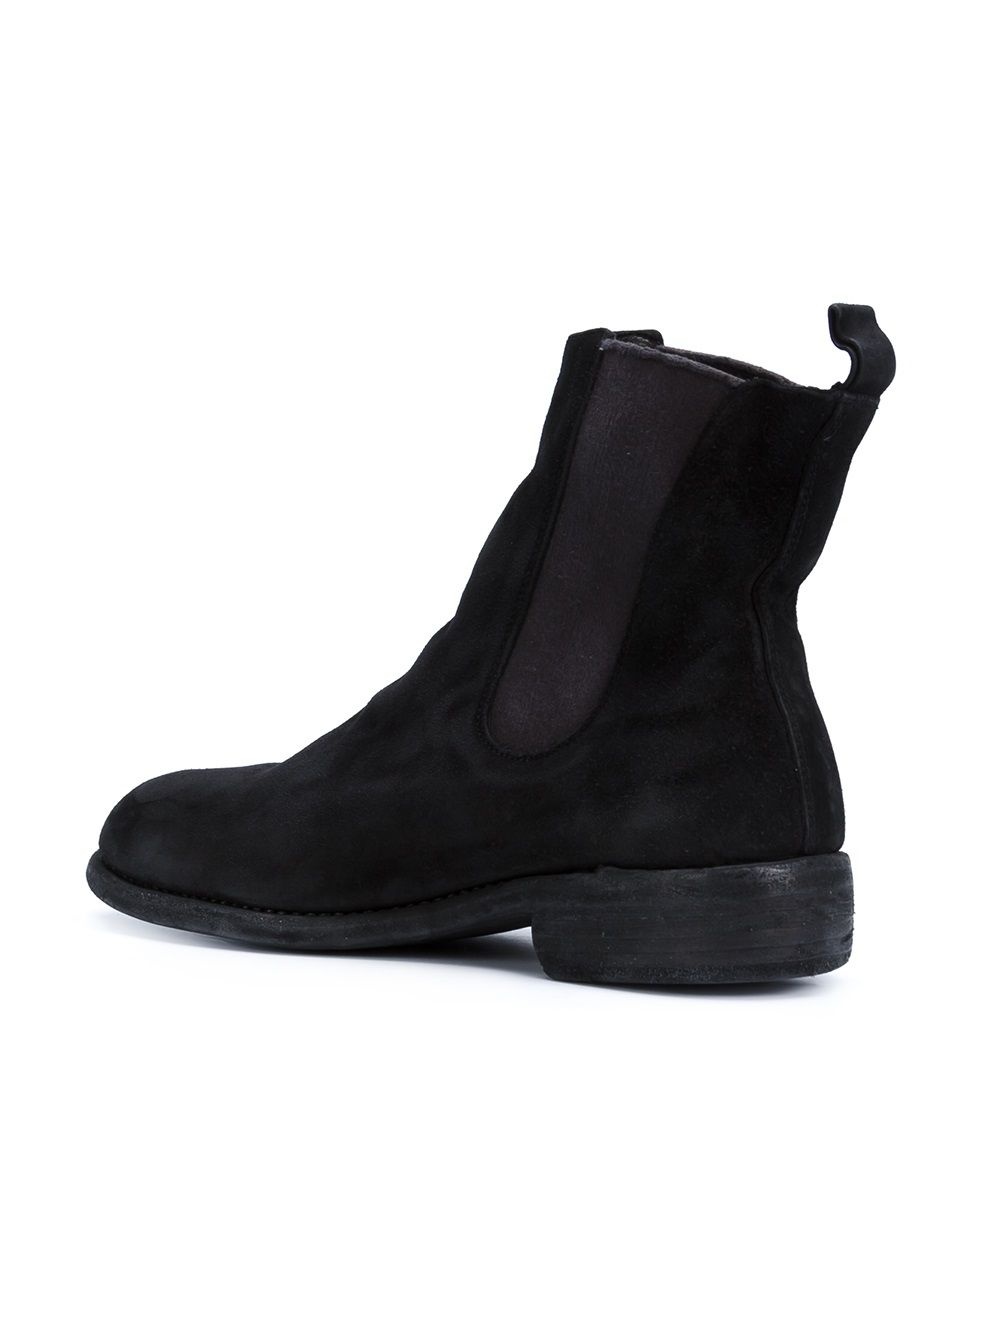 chelsea boots - 3